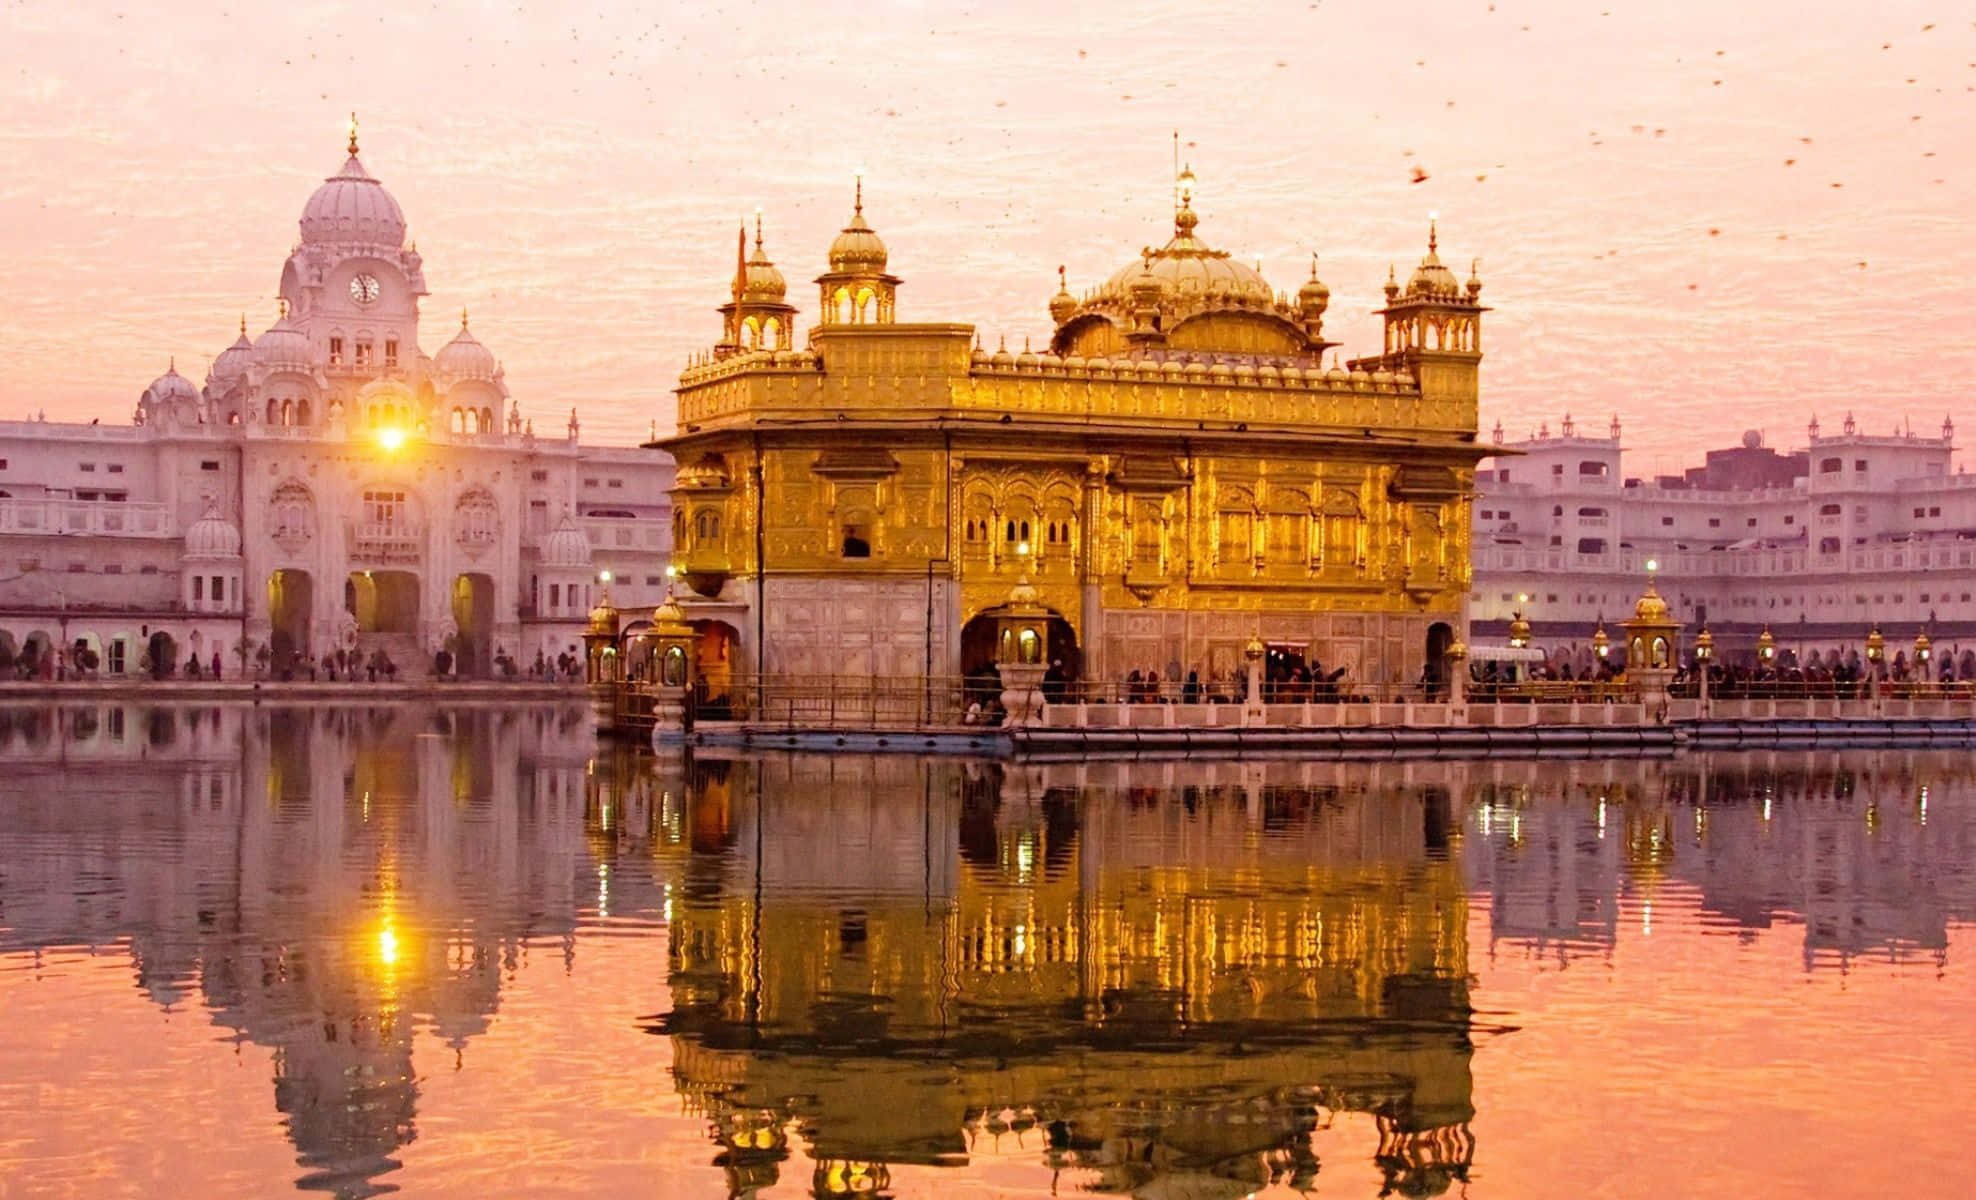 Serene Beauty of Golden Temple at Night